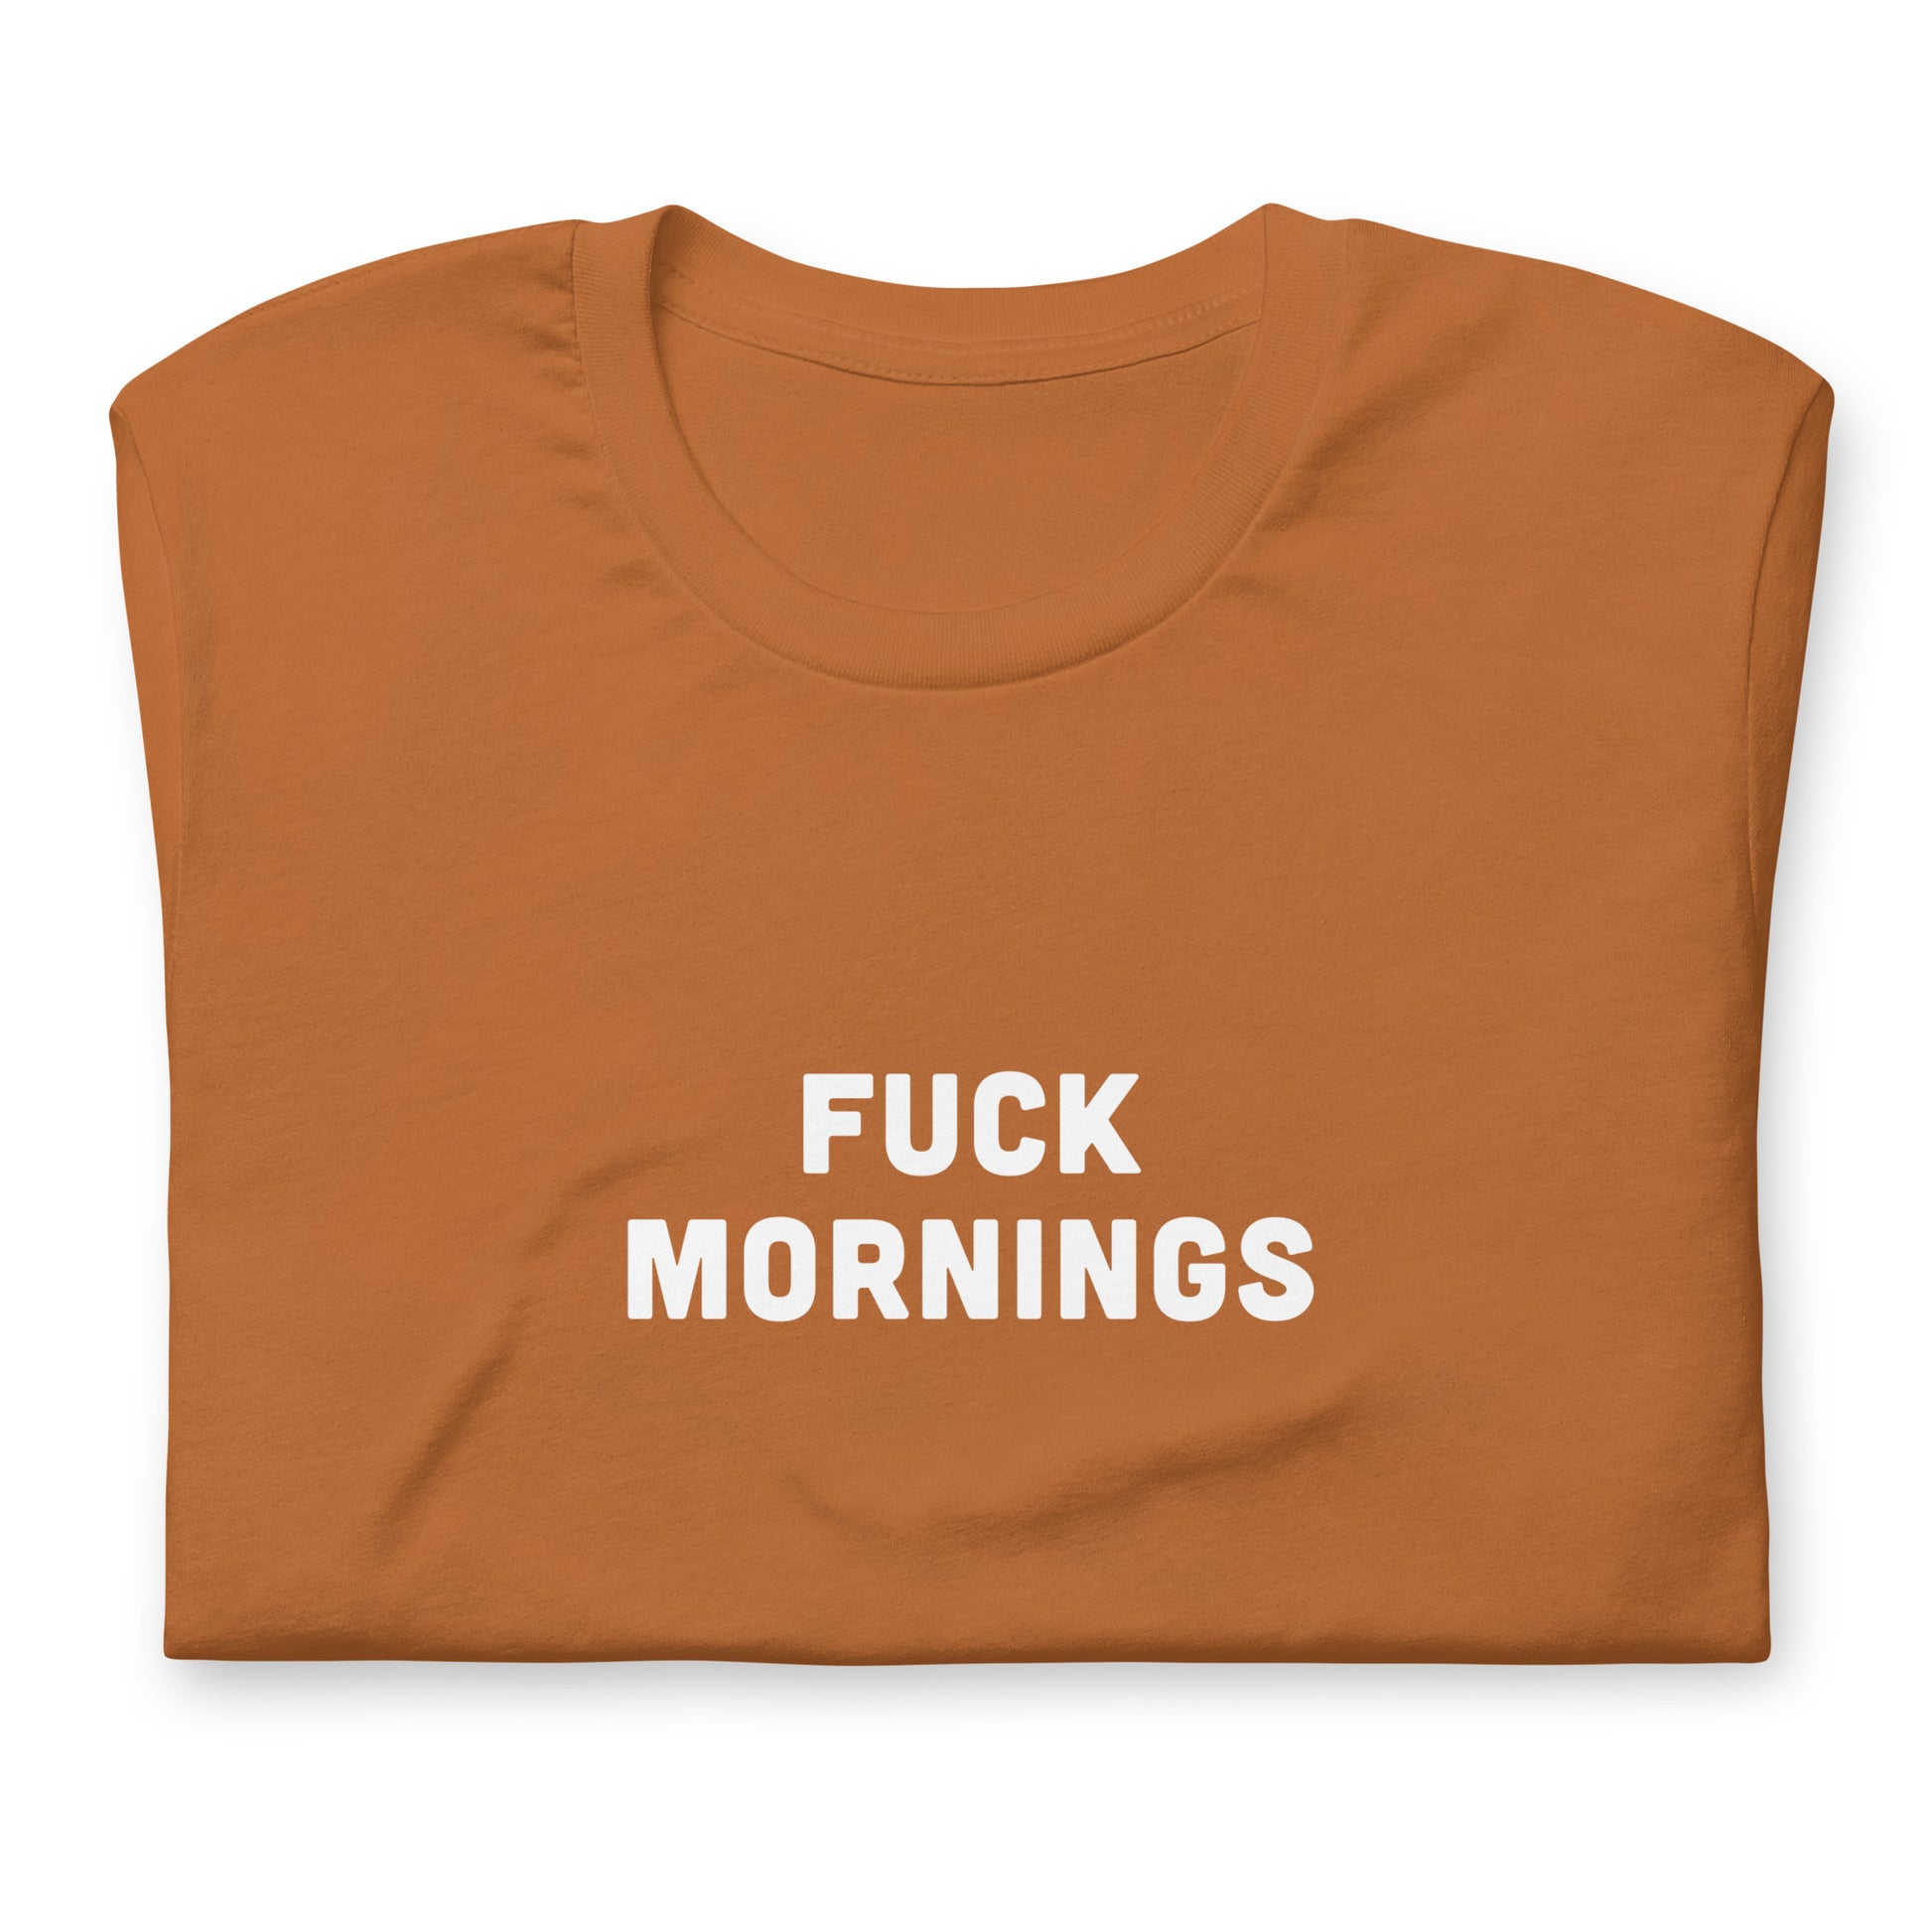 Fuck Mornings T-Shirt Size 2XL Color Navy